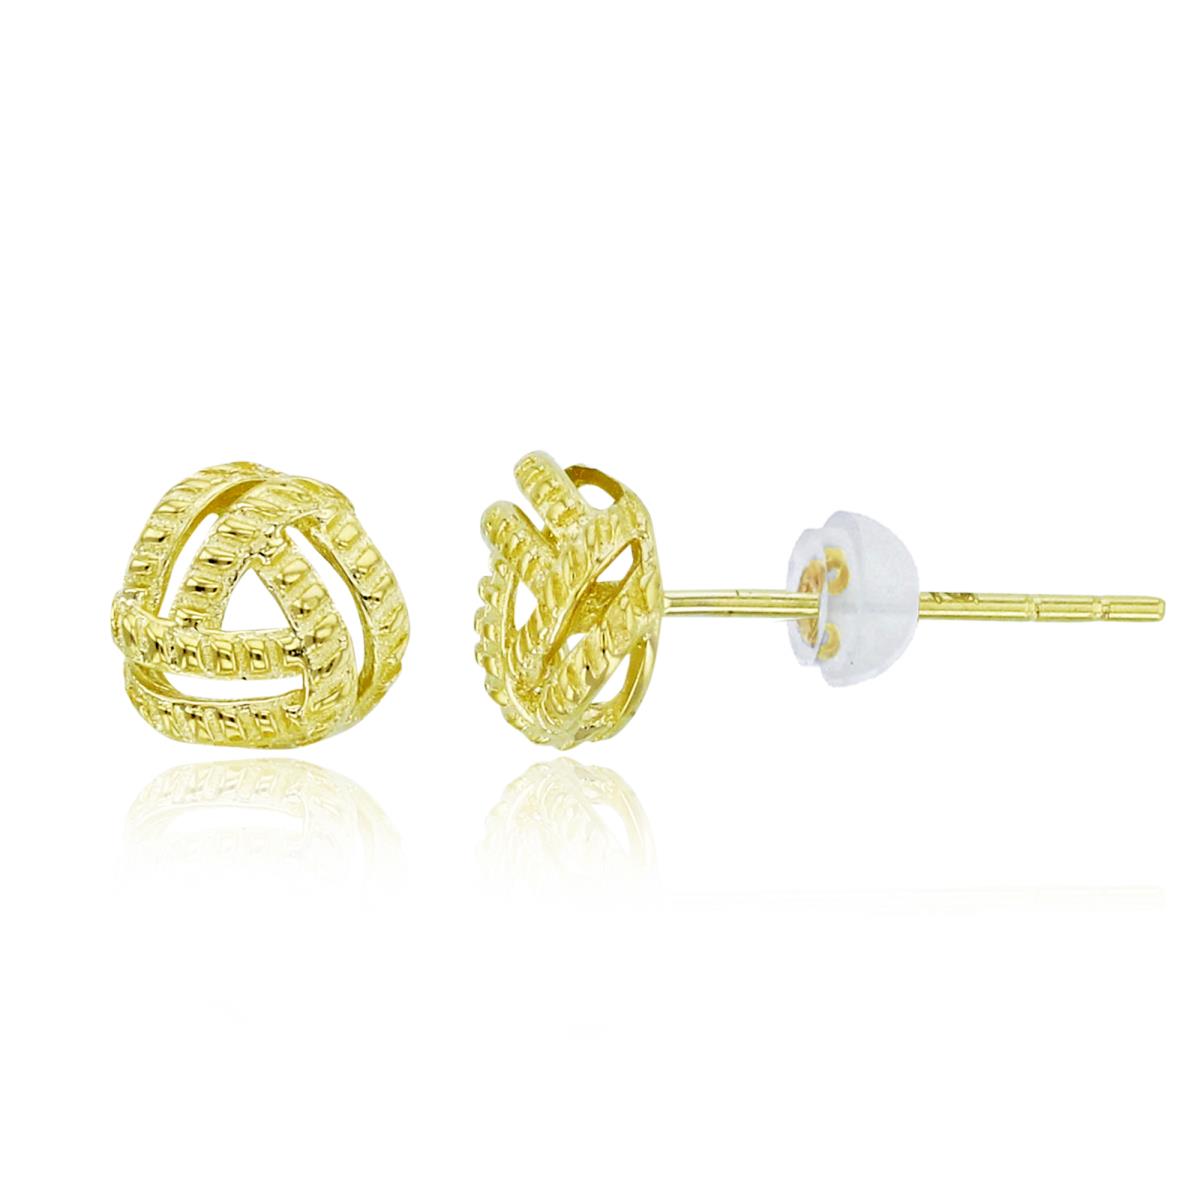 14K Yellow Gold Textured Knot Studs with Silicon Backs